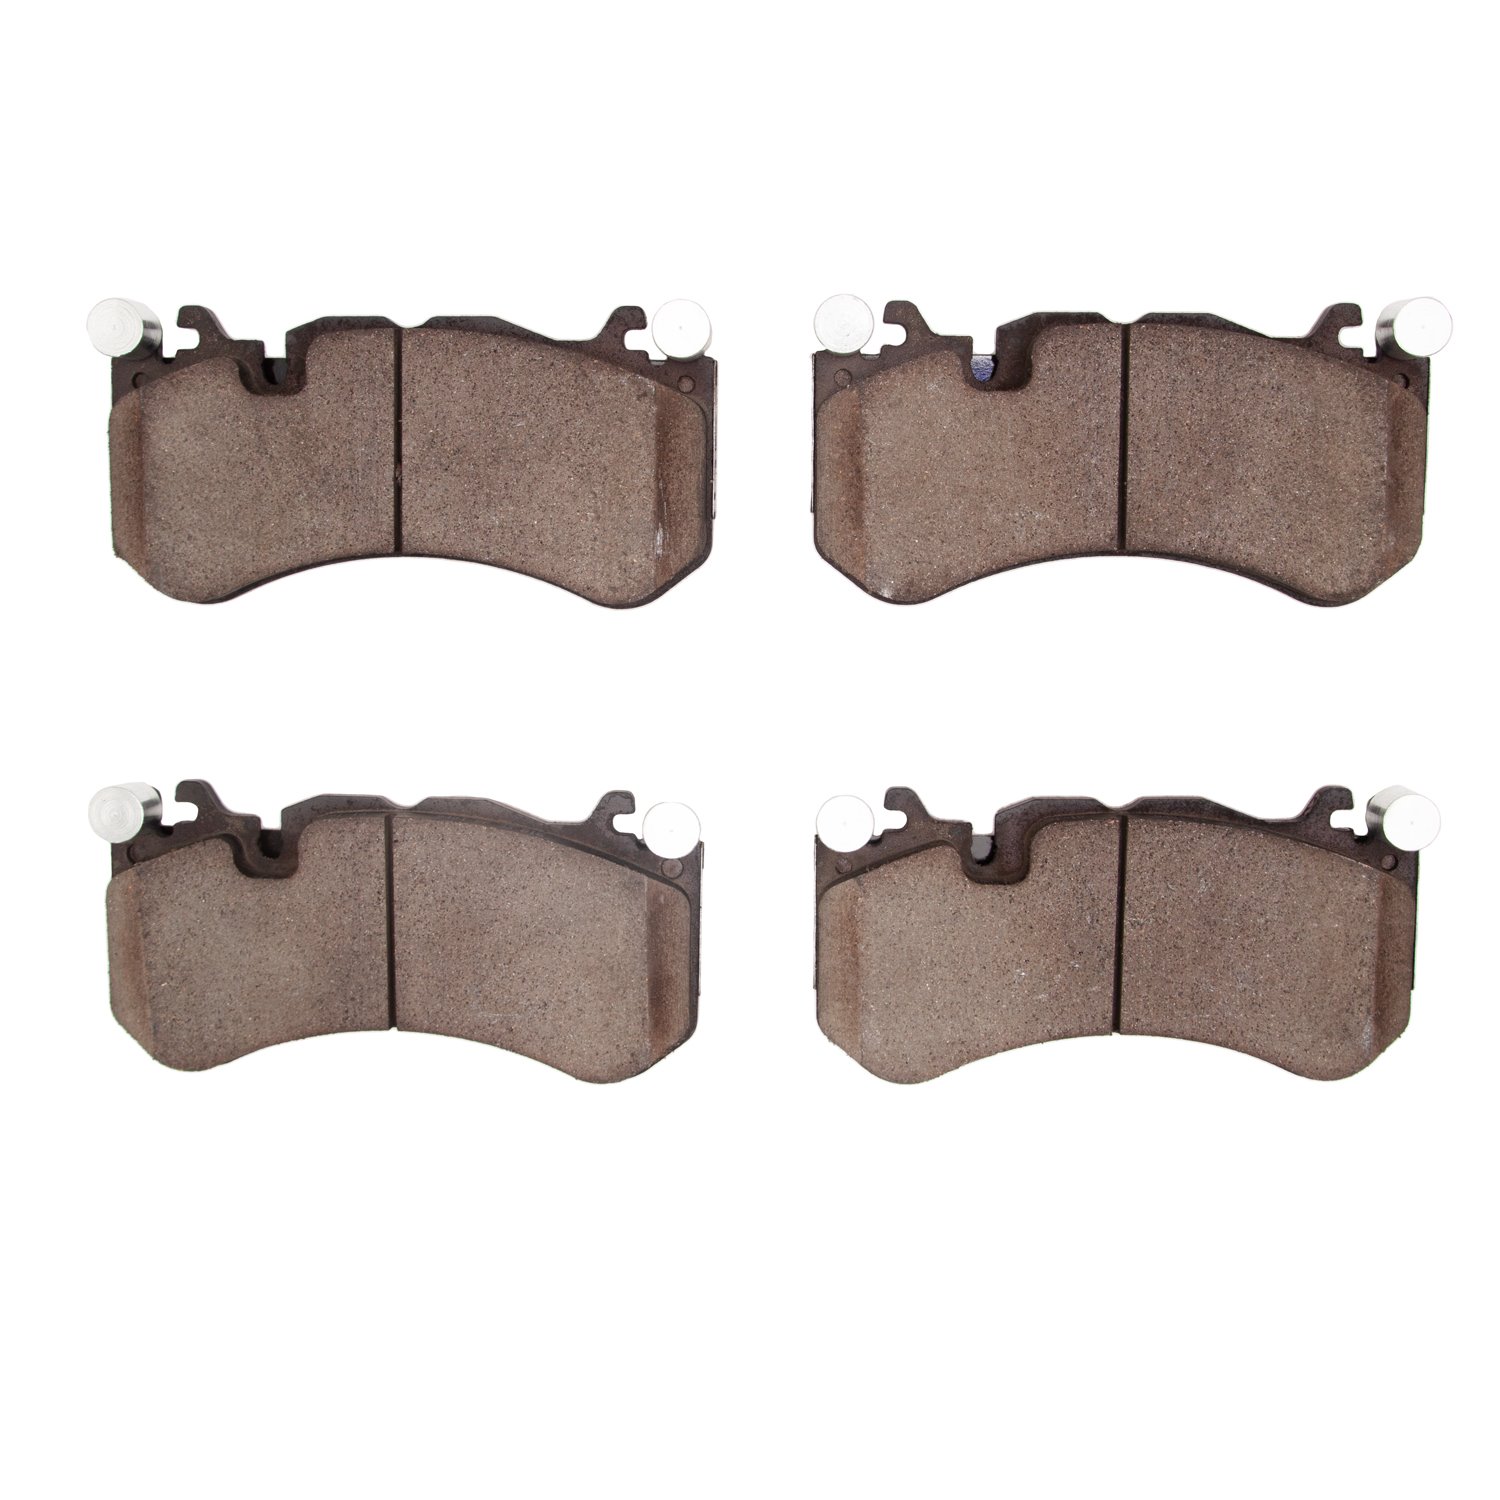 1115-1291-00 Active Performance Low-Metallic Brake Pads, Fits Select Multiple Makes/Models, Position: Front